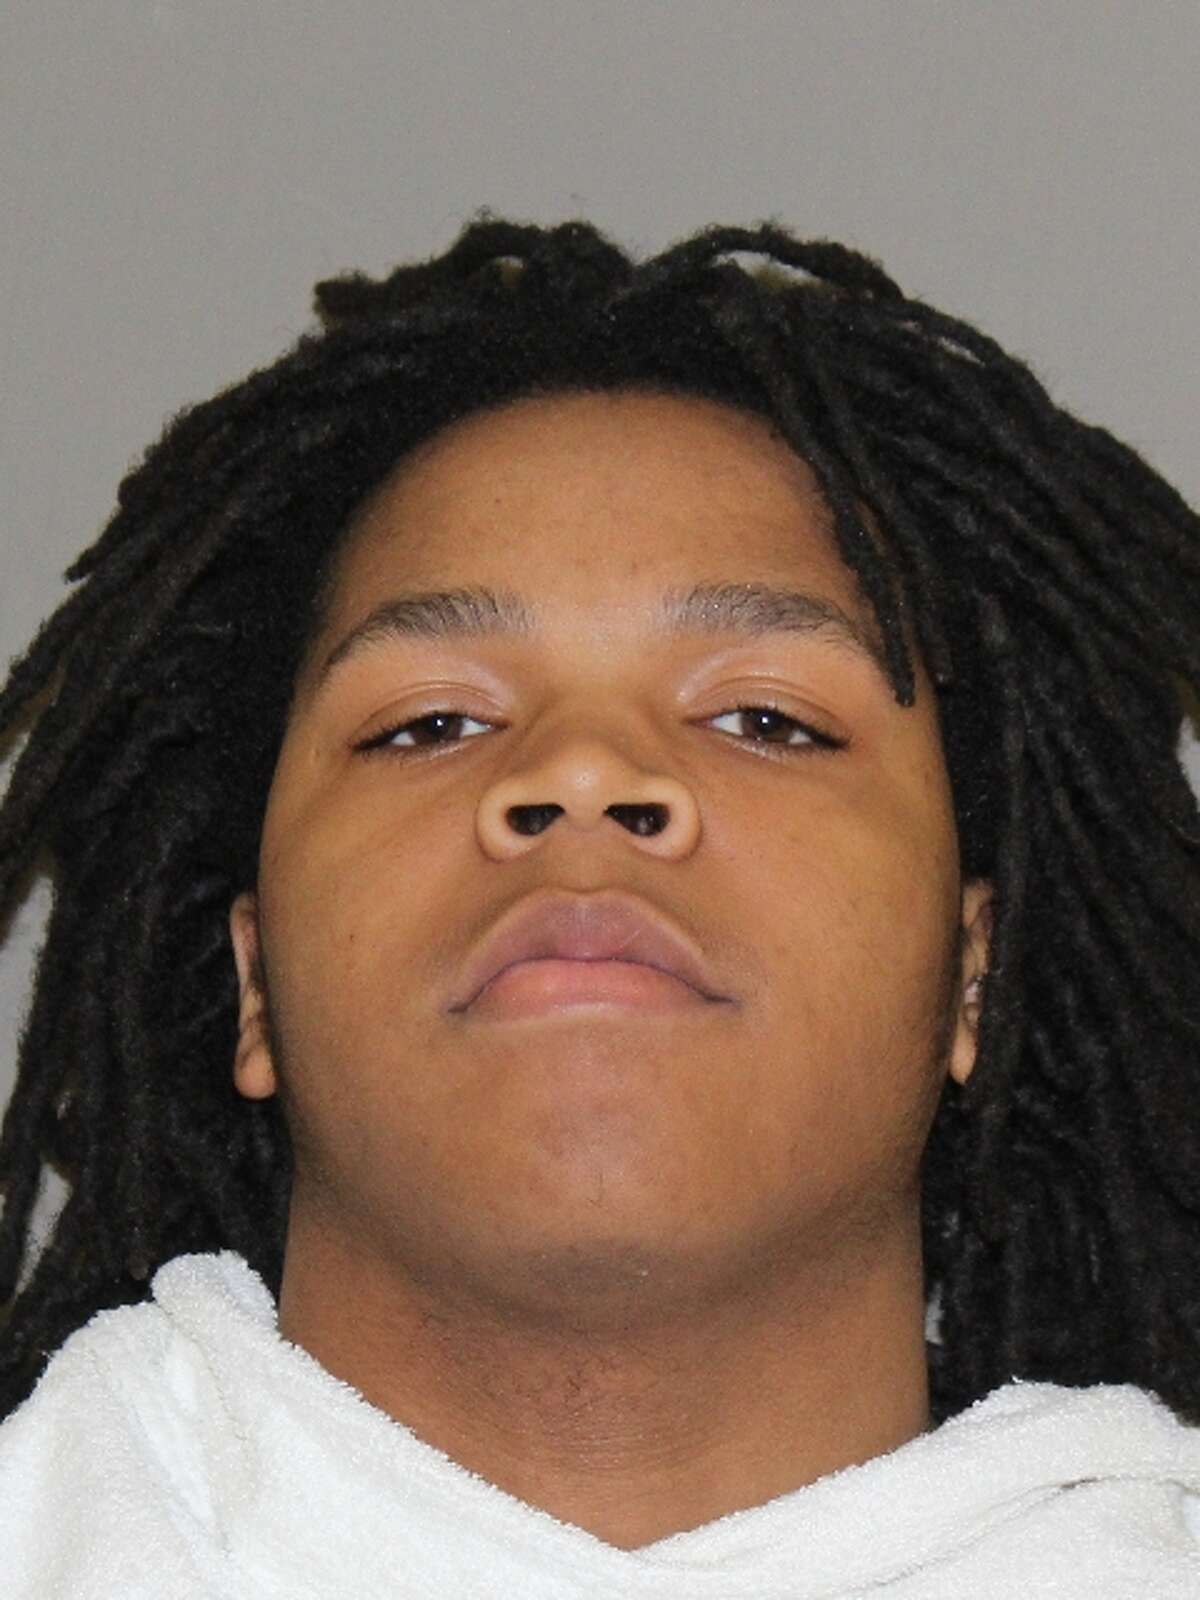 Isaiah Parker, 18, was charged with murder in the death of a missing Kingwood teen.